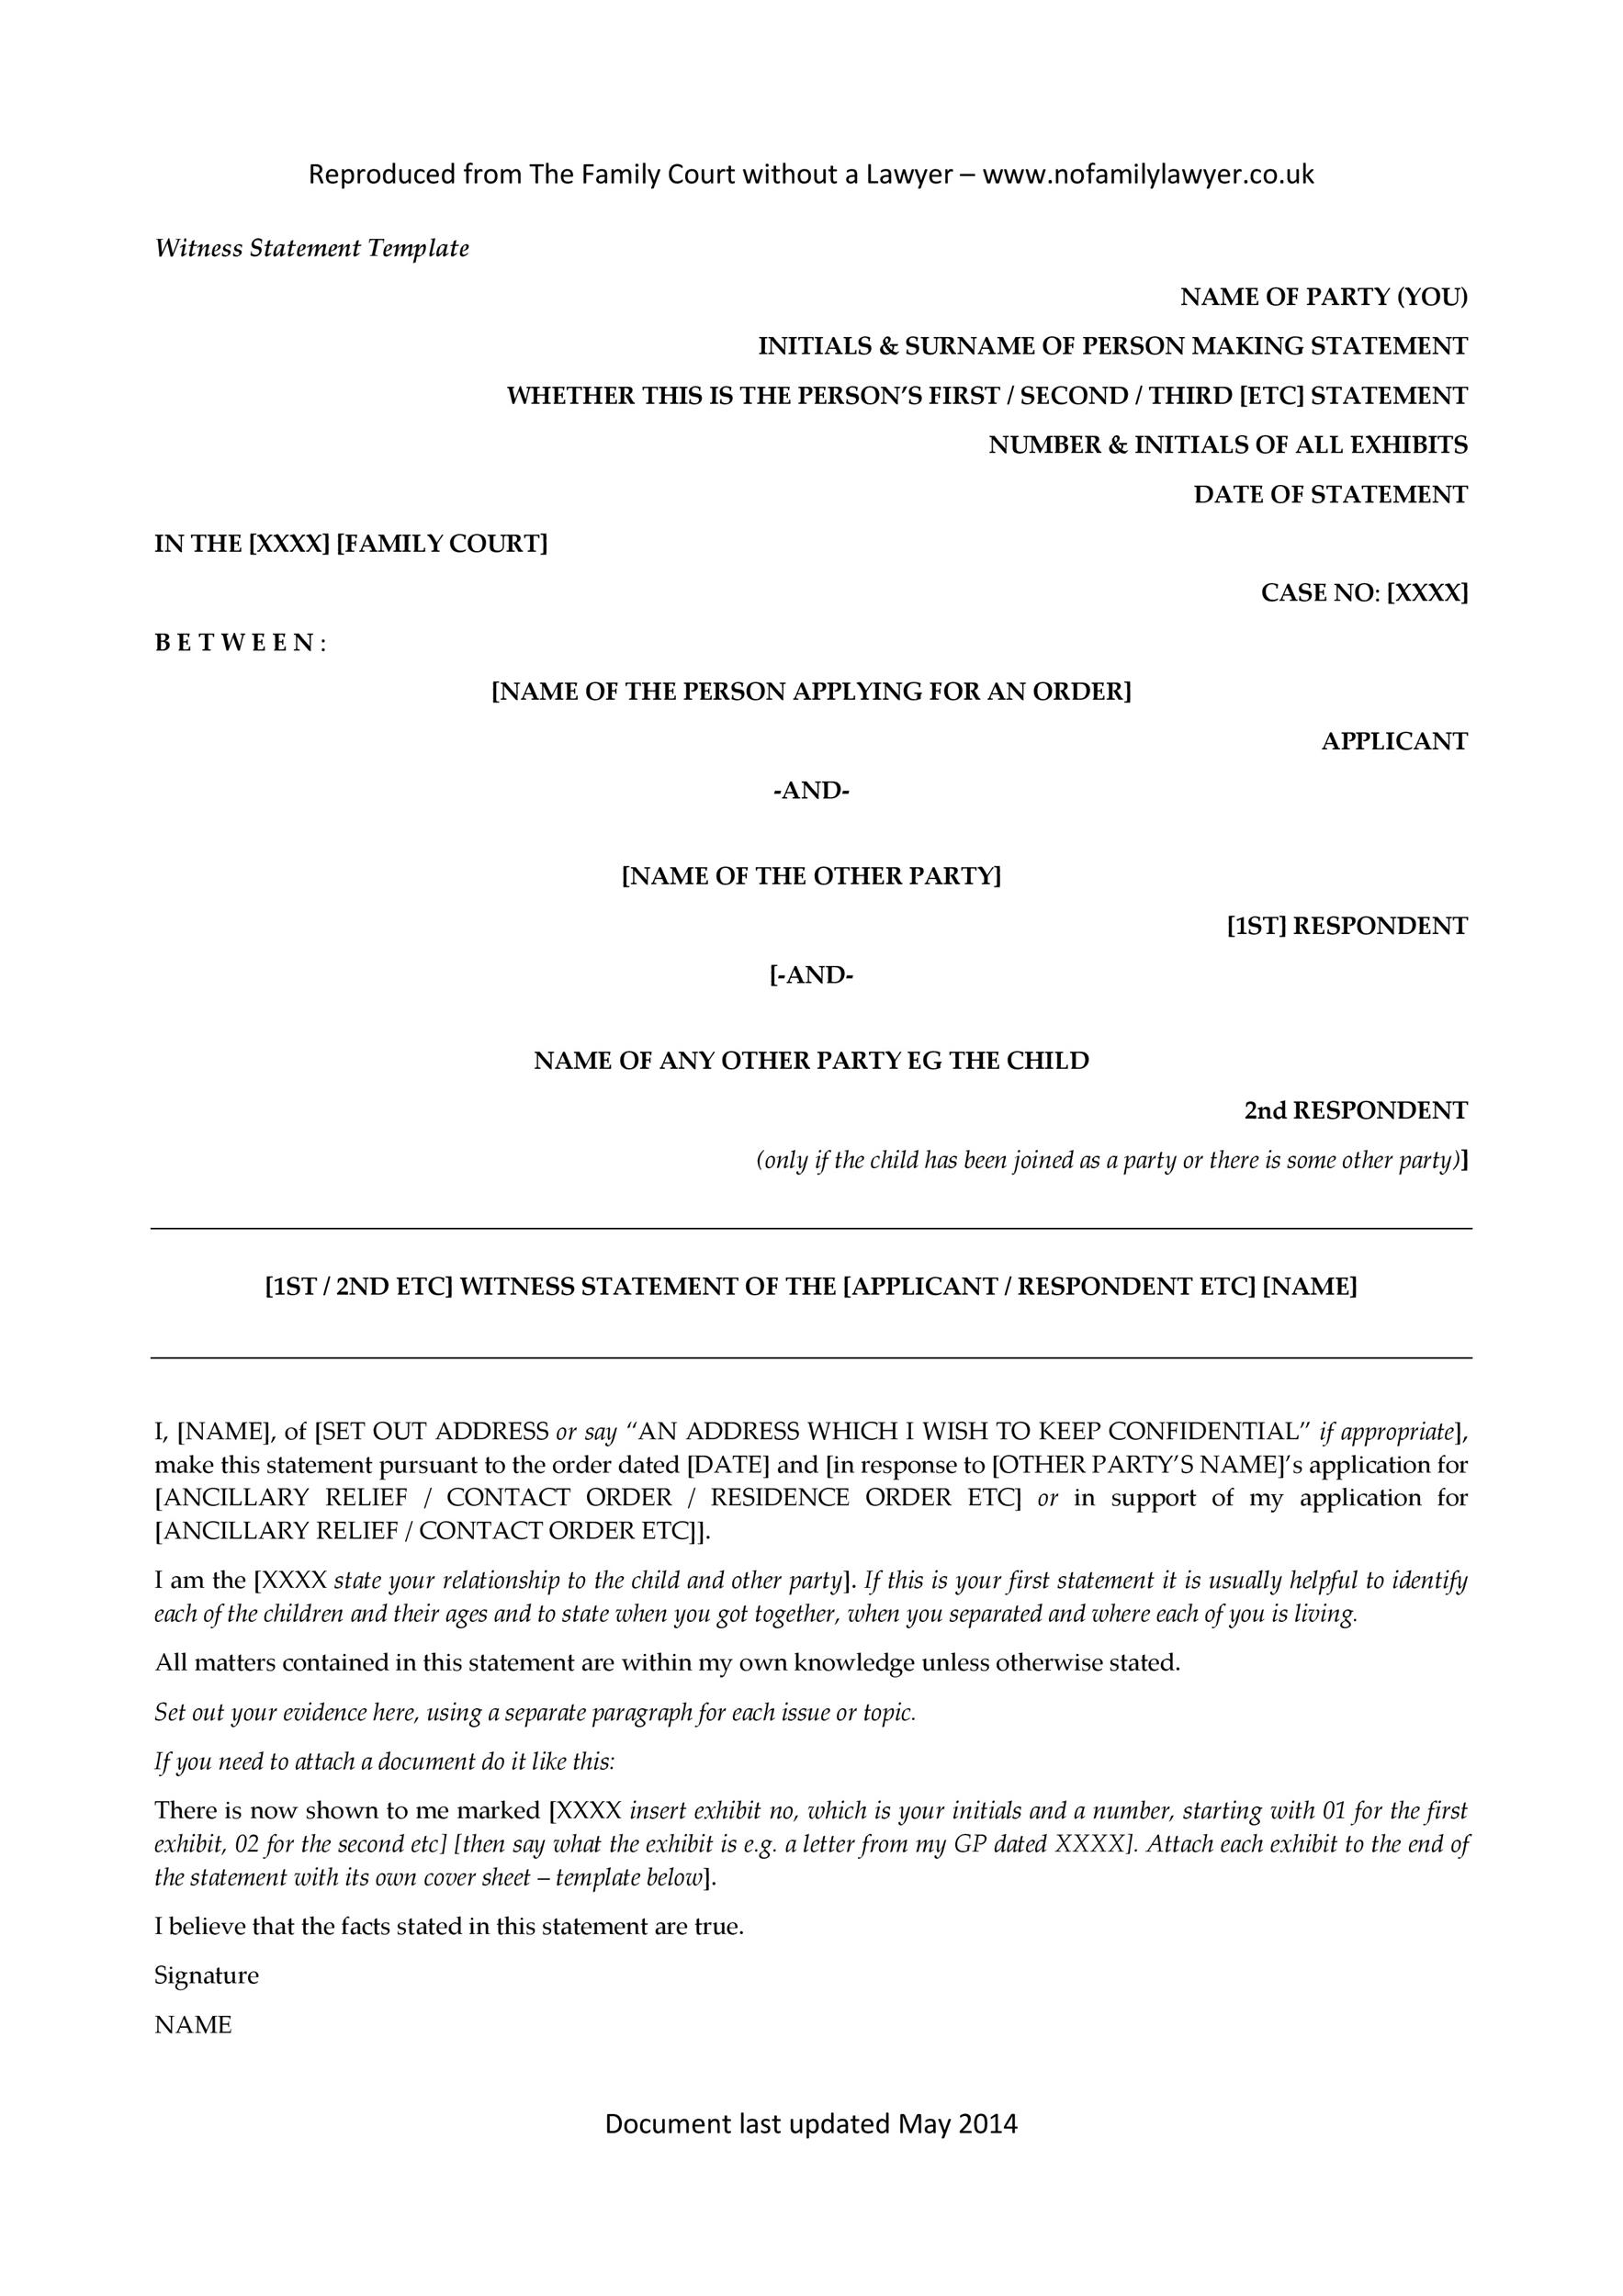 50 Professional Witness Statement Forms And Templates Templatelab 1555